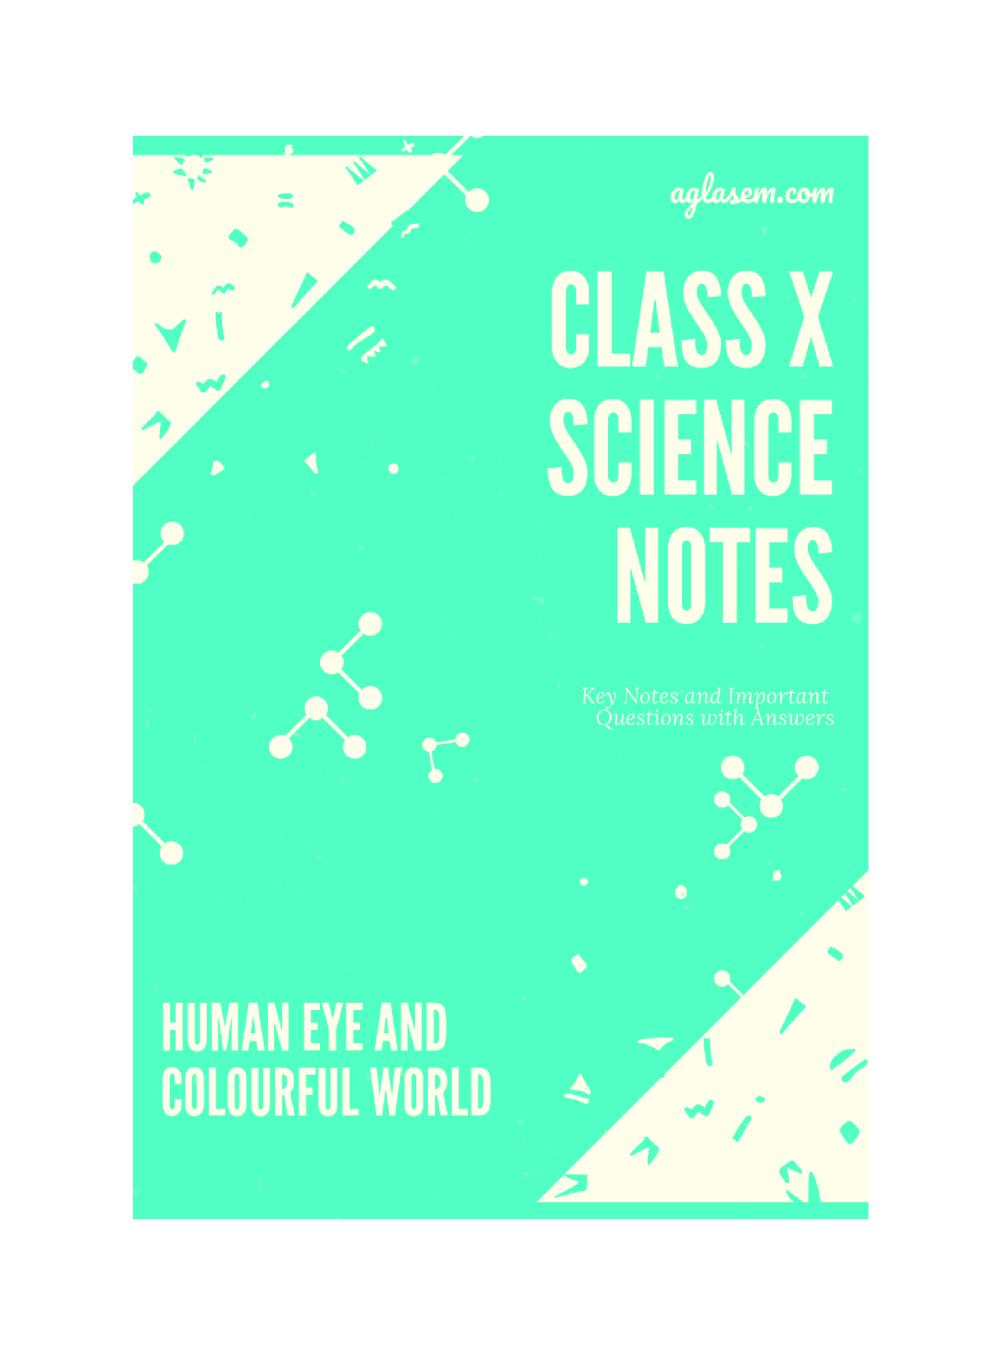 Class 10 Science Notes for Human Eye and Colourful World - Page 1